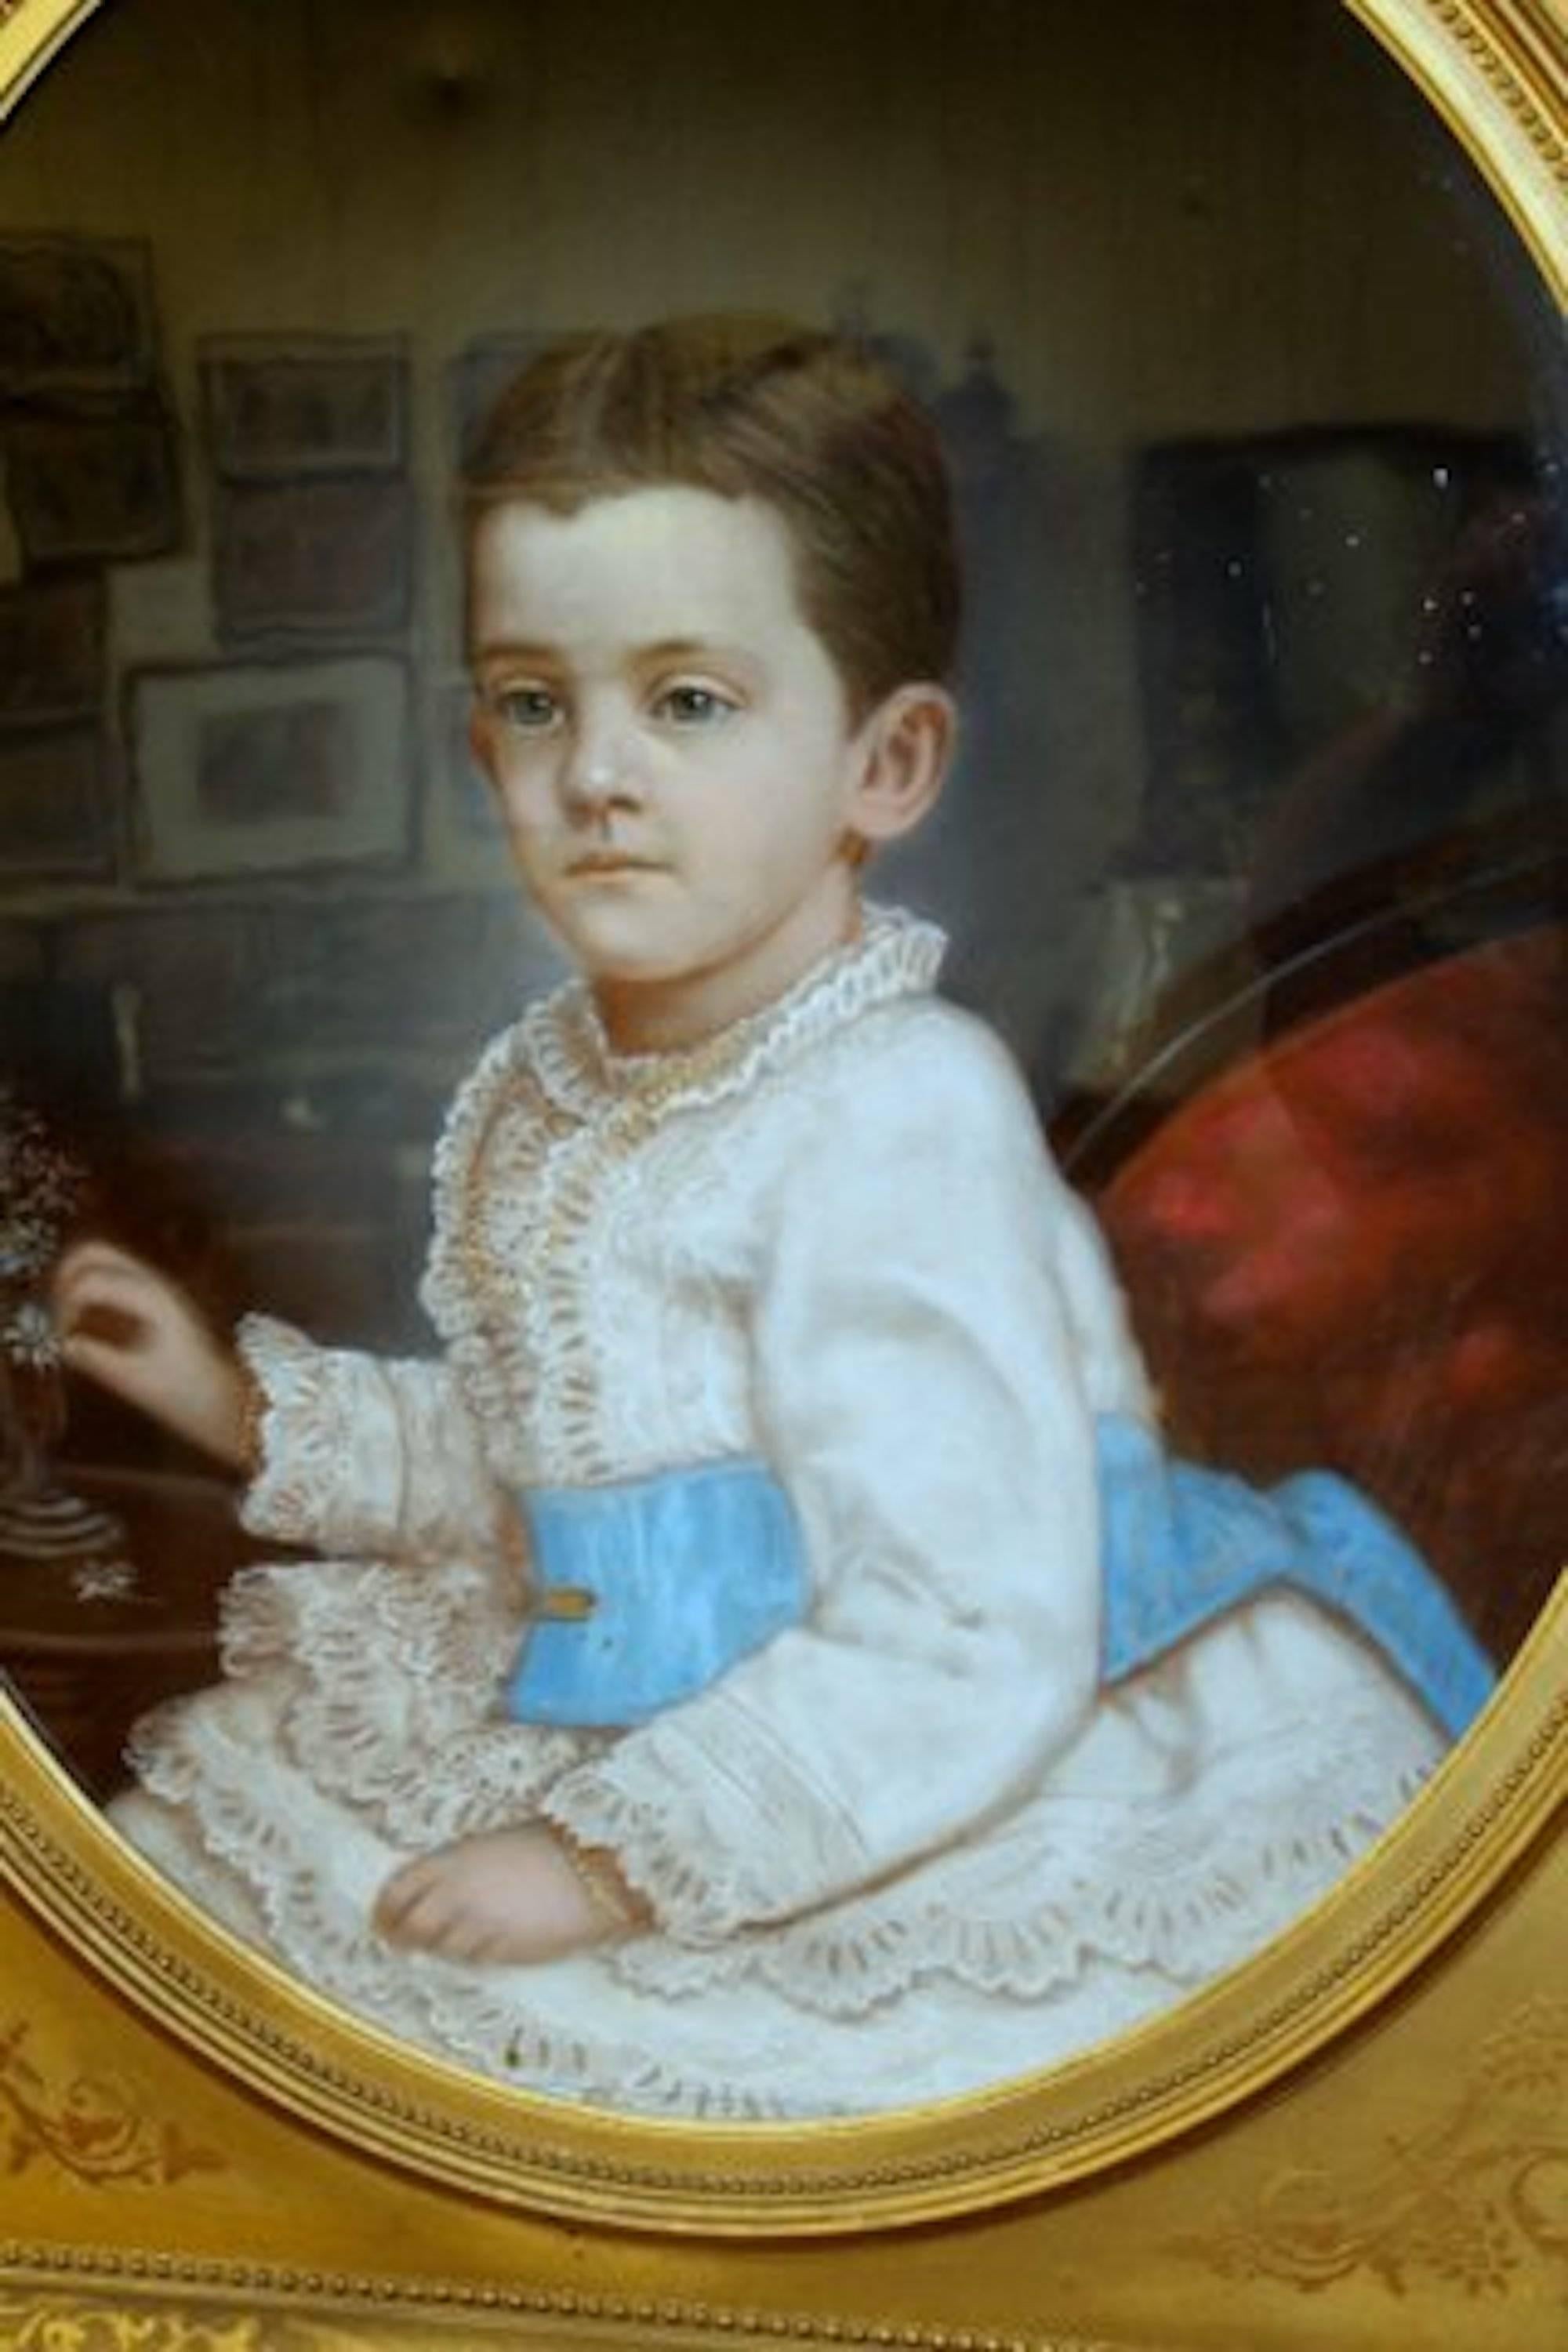 Fabulous antique French portrait of a young boy, original pastel, original frame (artist unknown and apparently unsigned)

Original gold leaf frame (some gilt loss noted) portrait is in pristine condition. It has been viewed beneath the frame and